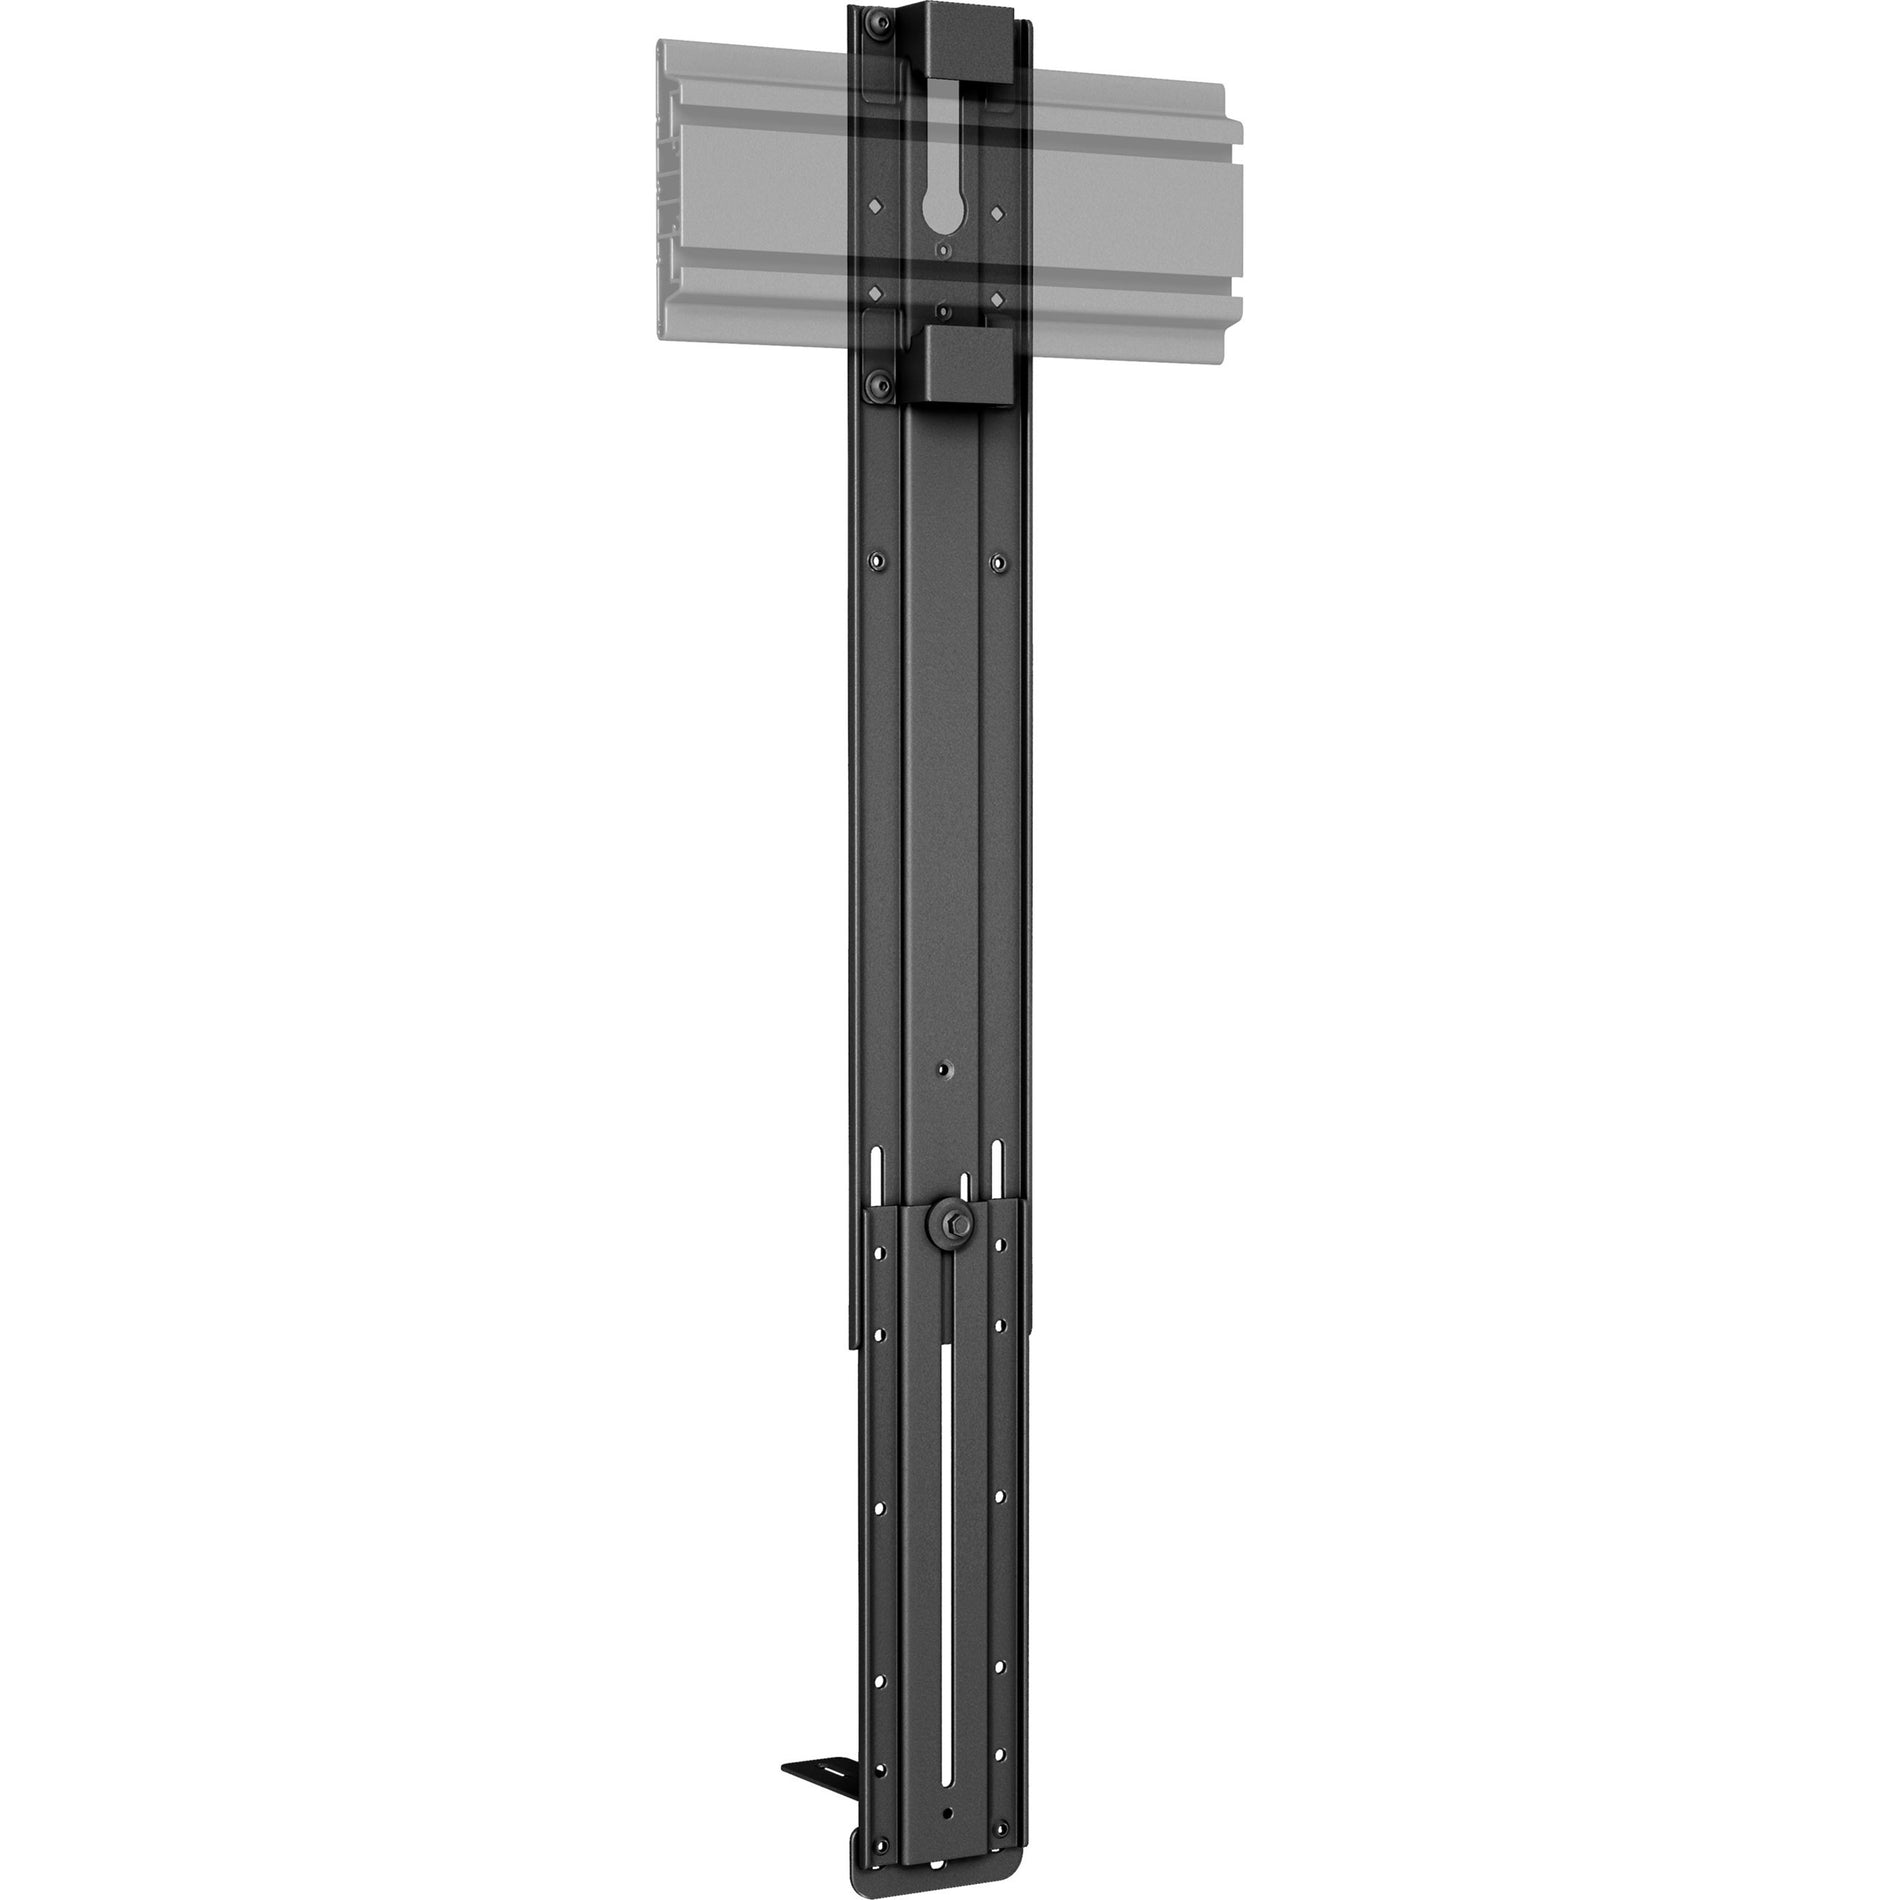 Chief FCA800 Fusion Mounting Shelf for A/V Equipment, Flat Panel Display, Video Conferencing System - Black, TAA Compliant